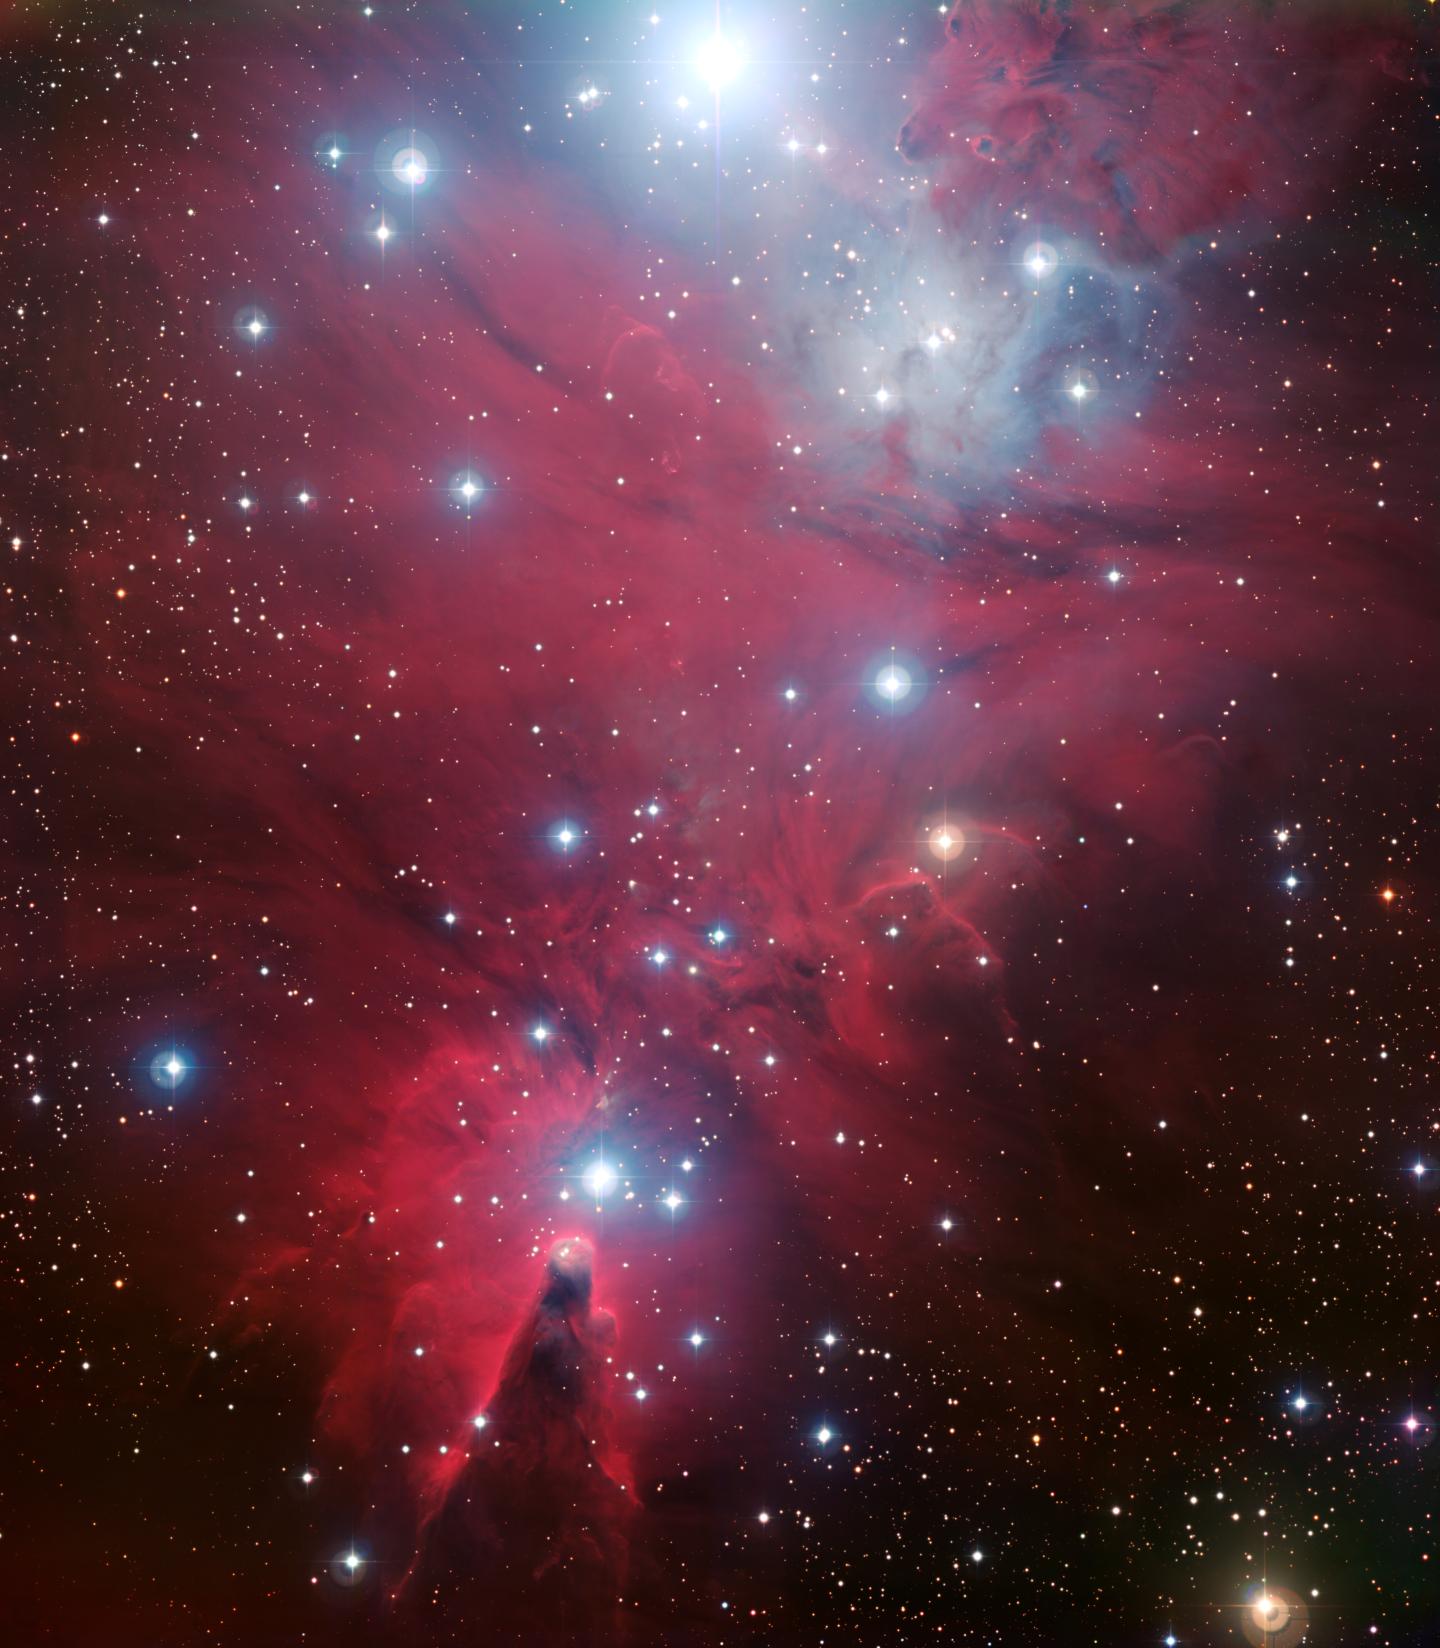 Image of NGC 2264. Clouds of dust throughout the nebula have a pink-red hue, and bright stars are scattered throughout the image. 